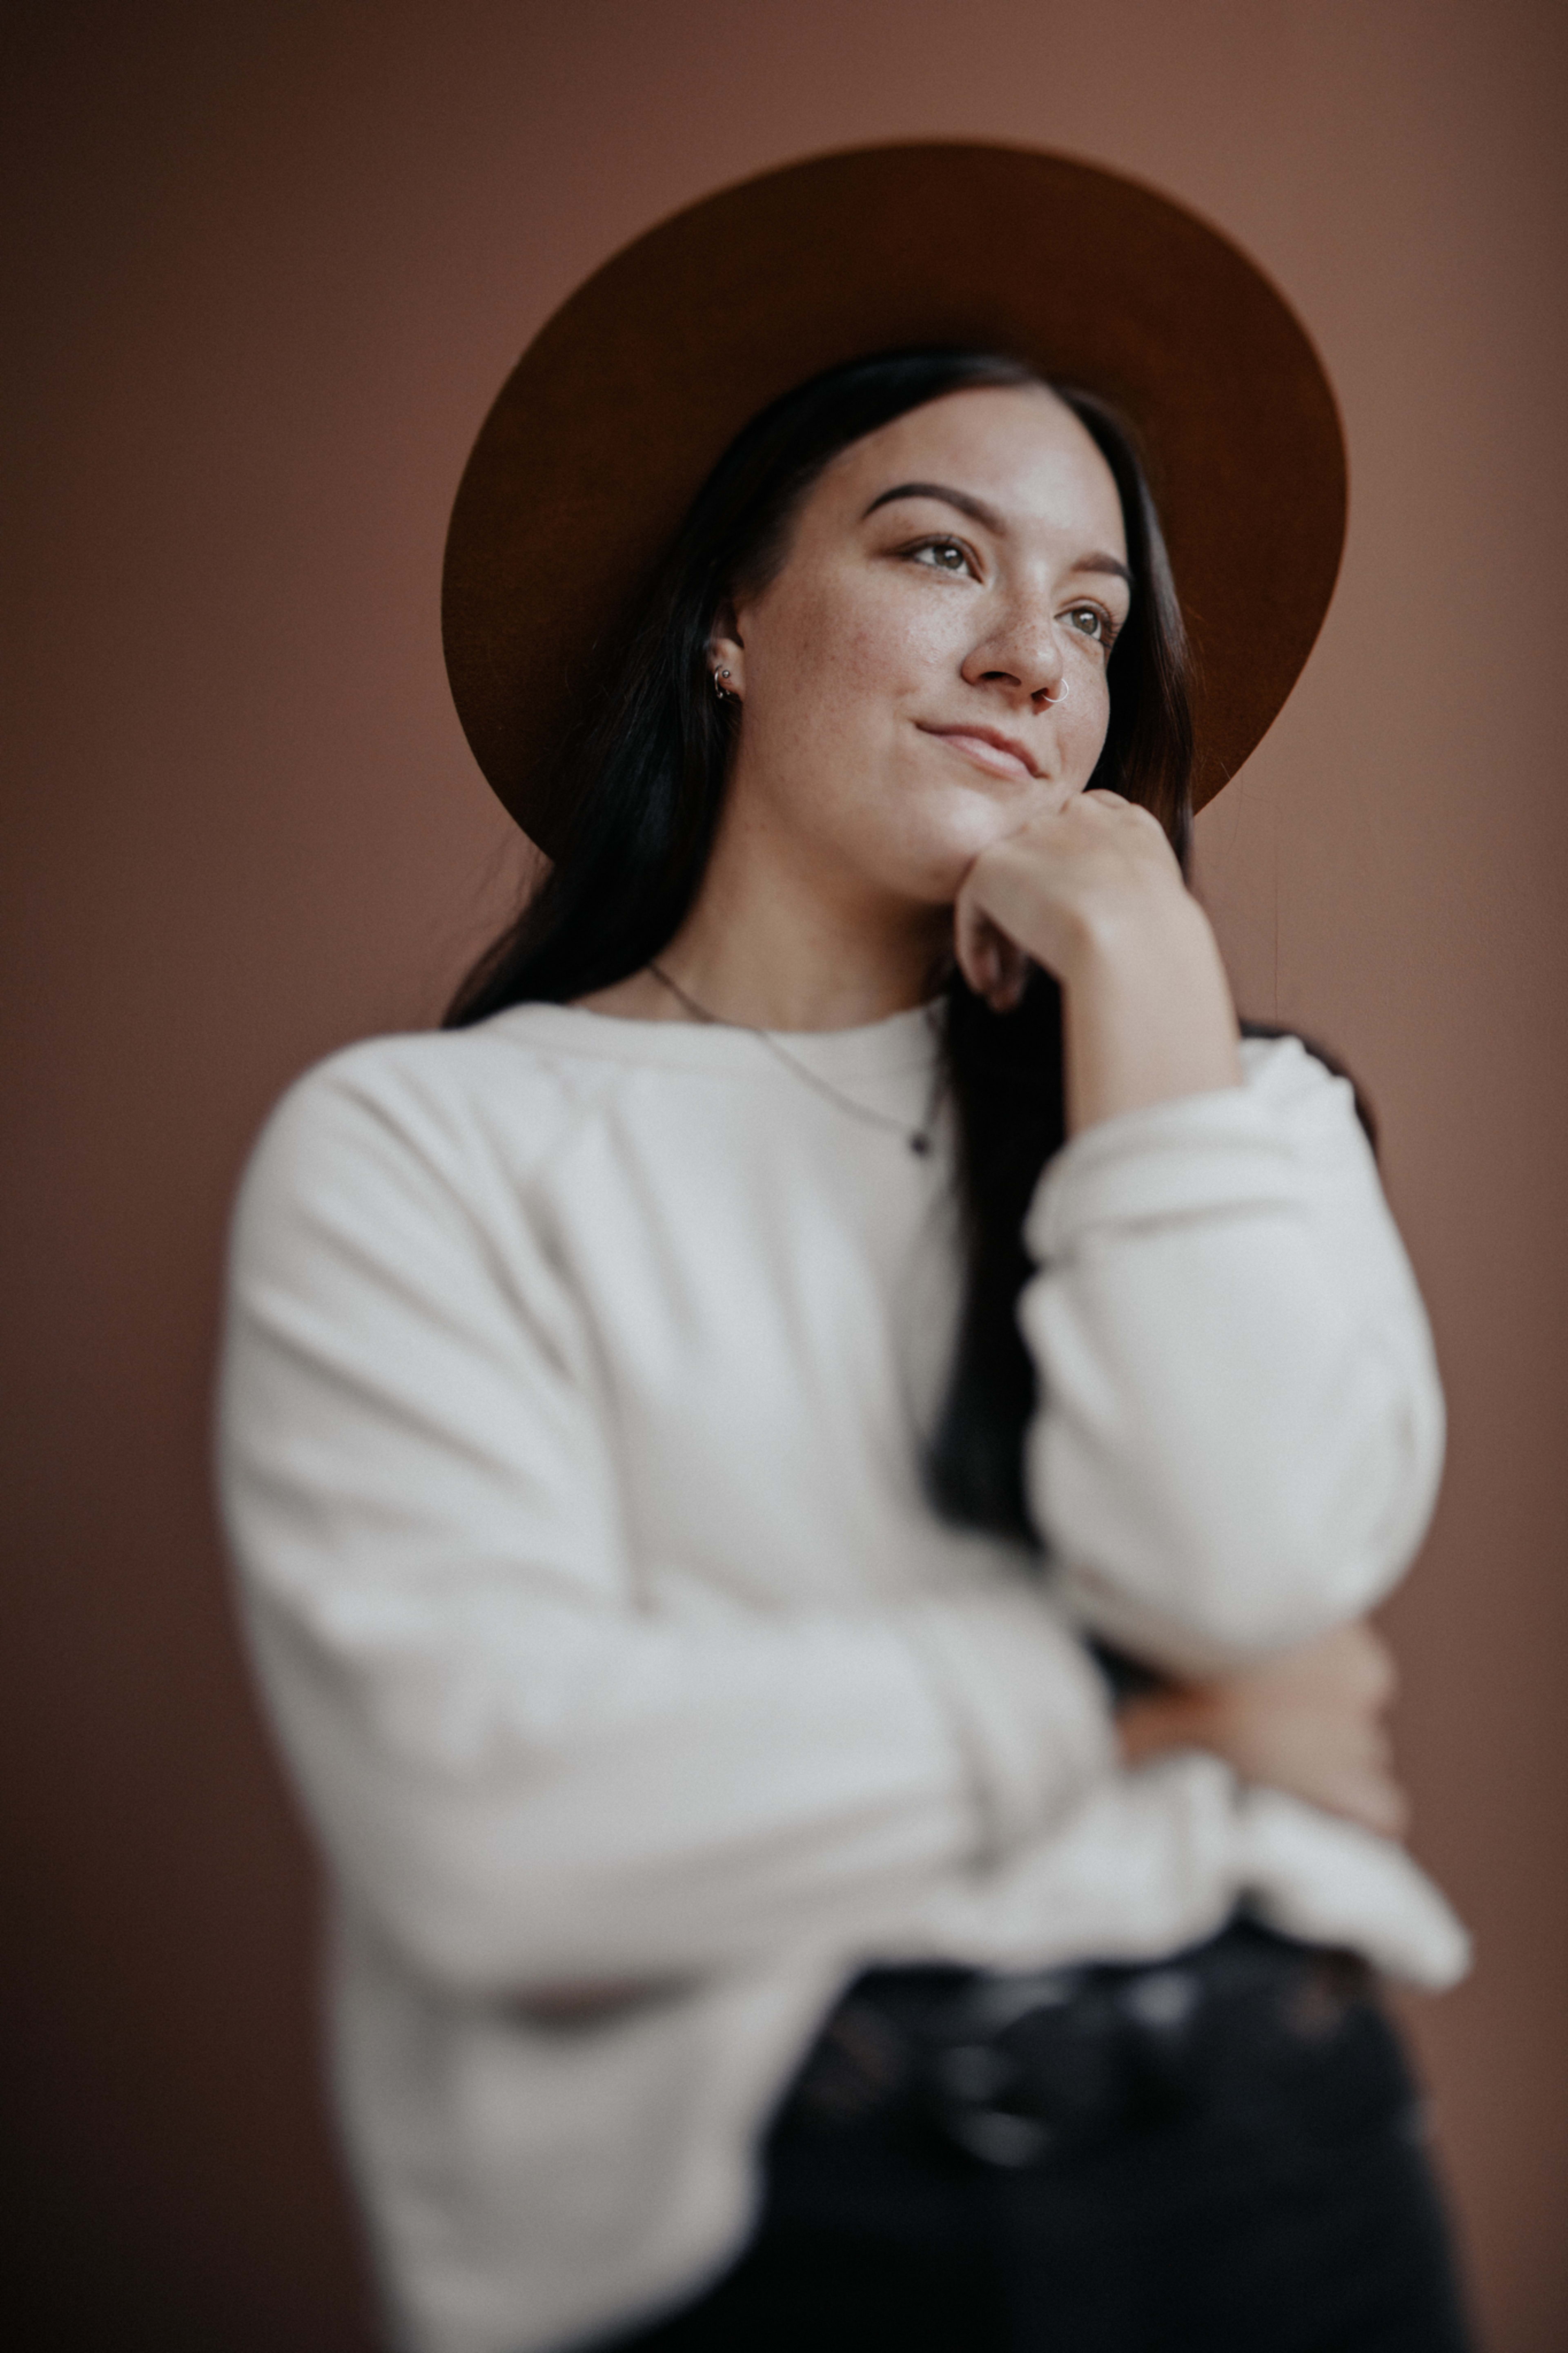 A woman wearing a hat poses for a minimal headshot portrait.